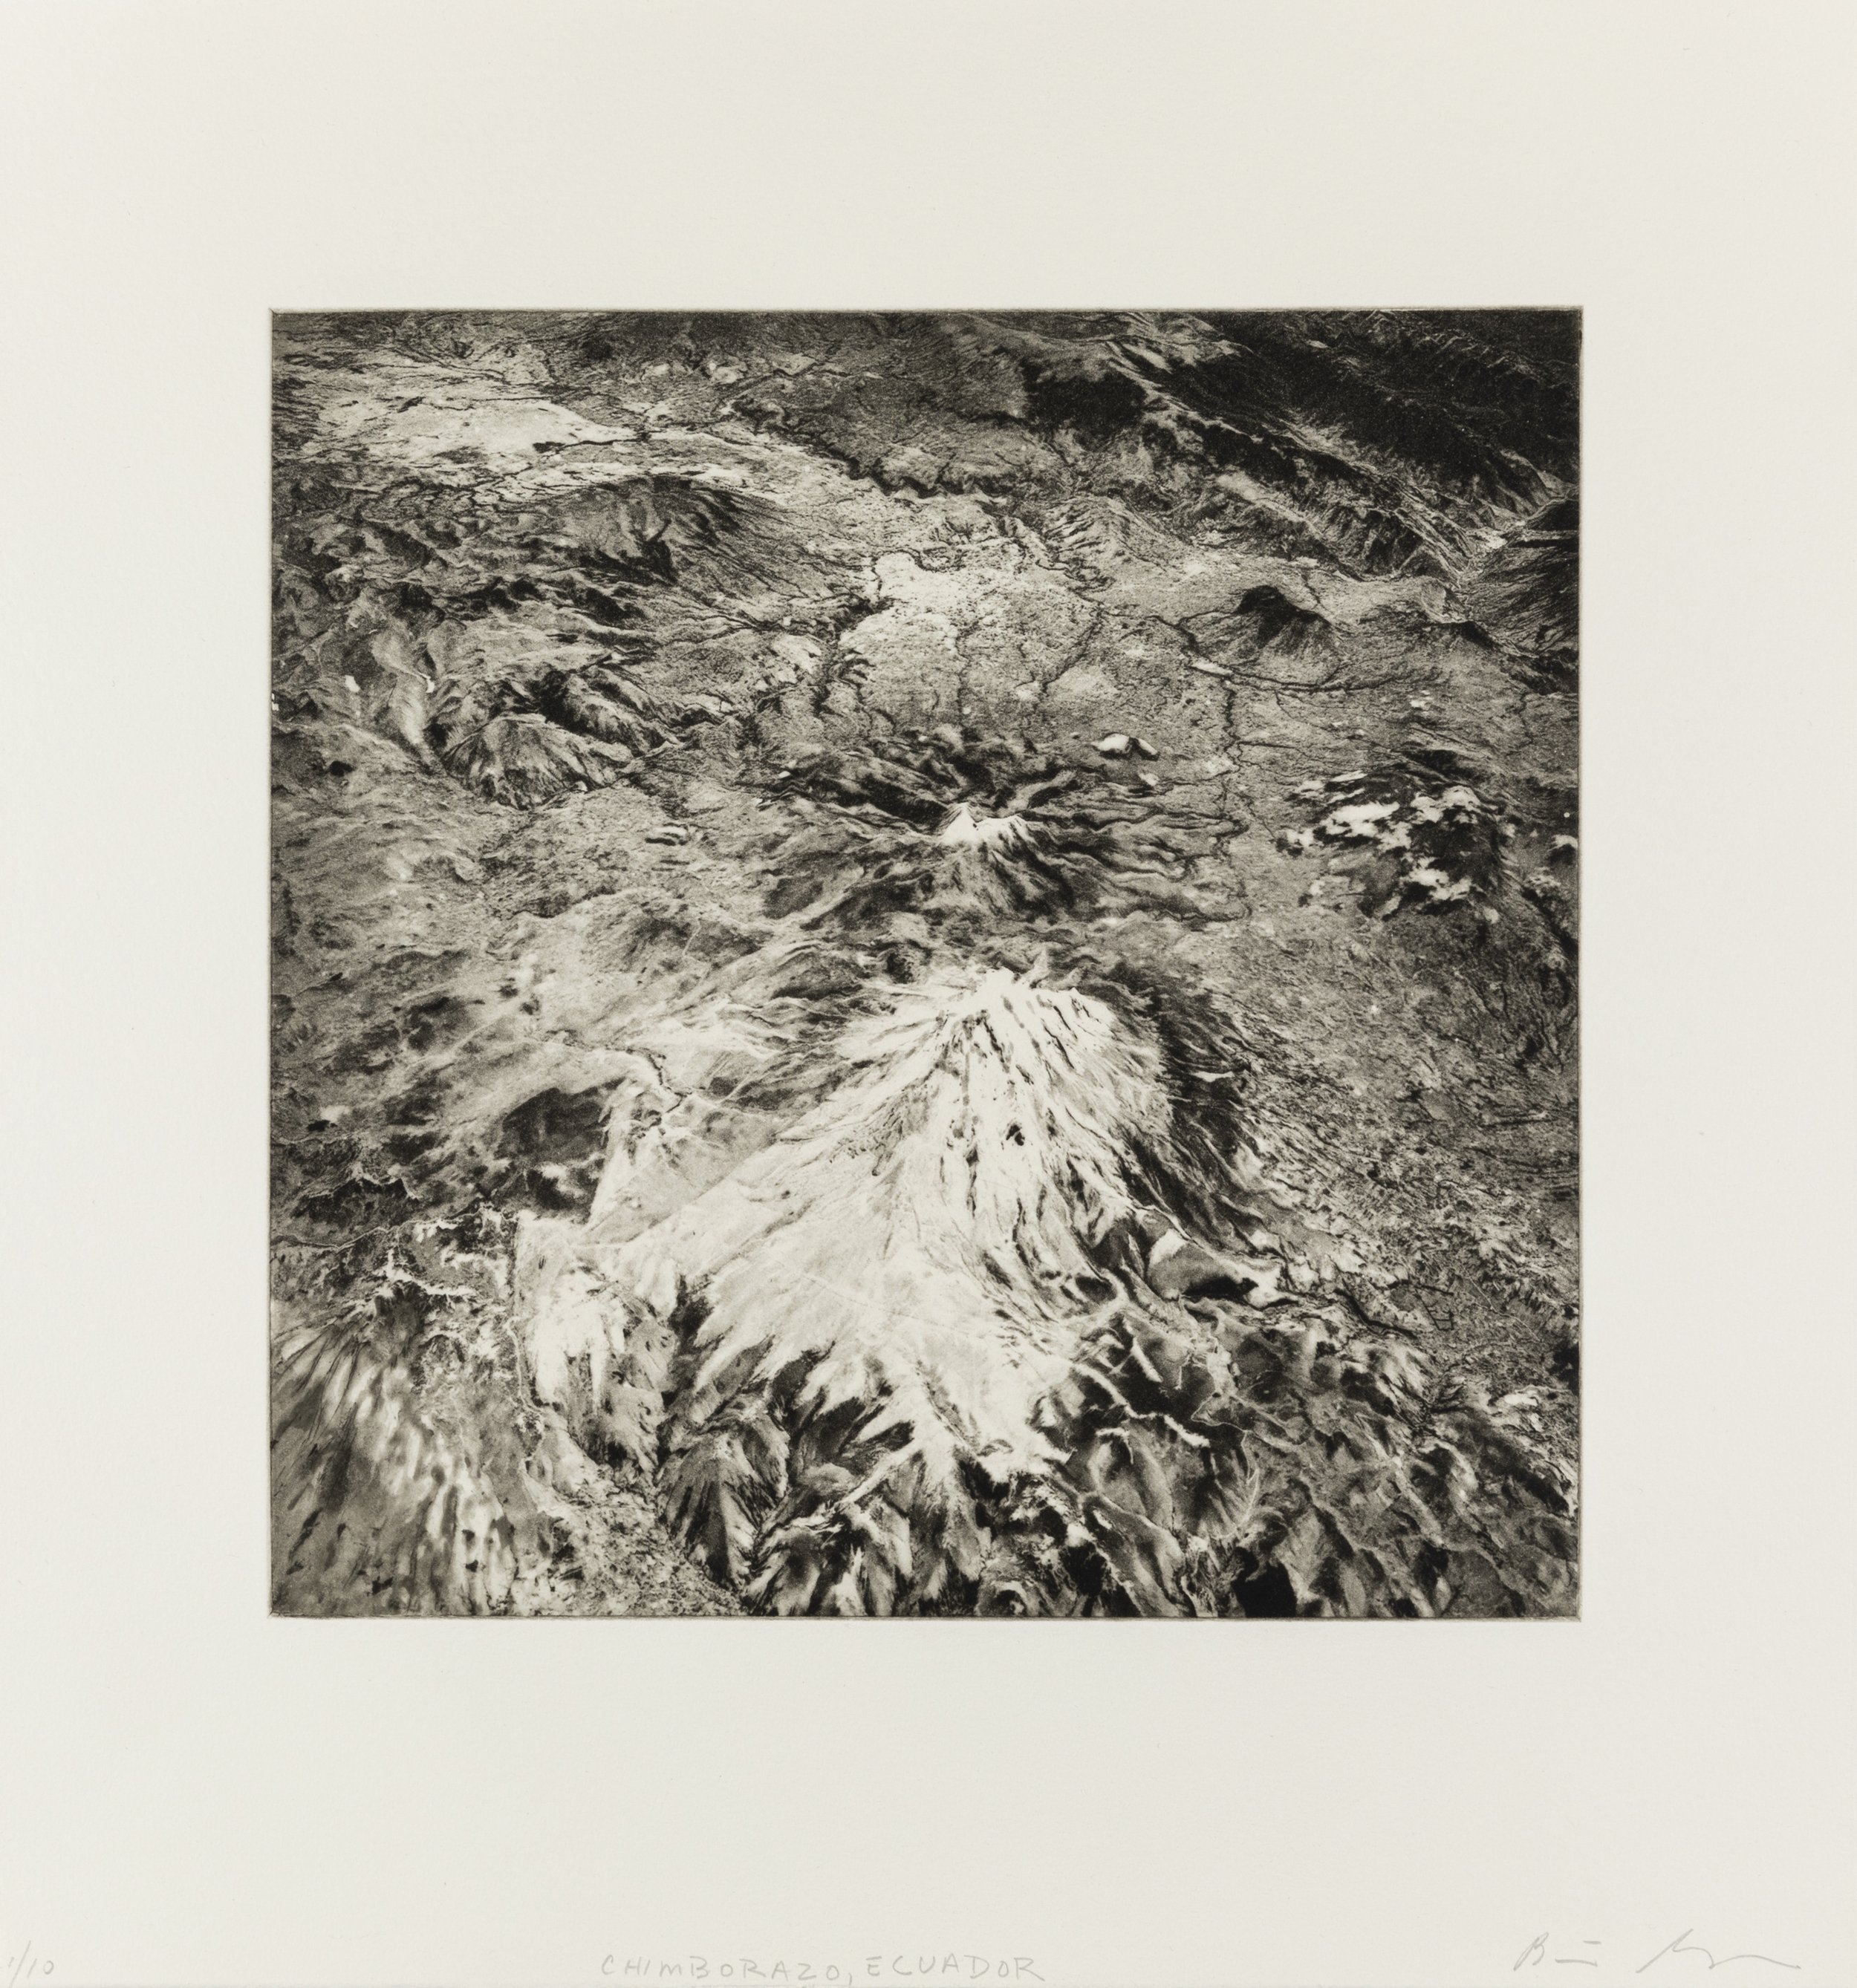    Chimborazo, Ecuador, 2021   Copperplate photogravure etching on cotton rag paper, plate size; 10.6 x 10.6, paper size; 16 x 15.5, edition 10  